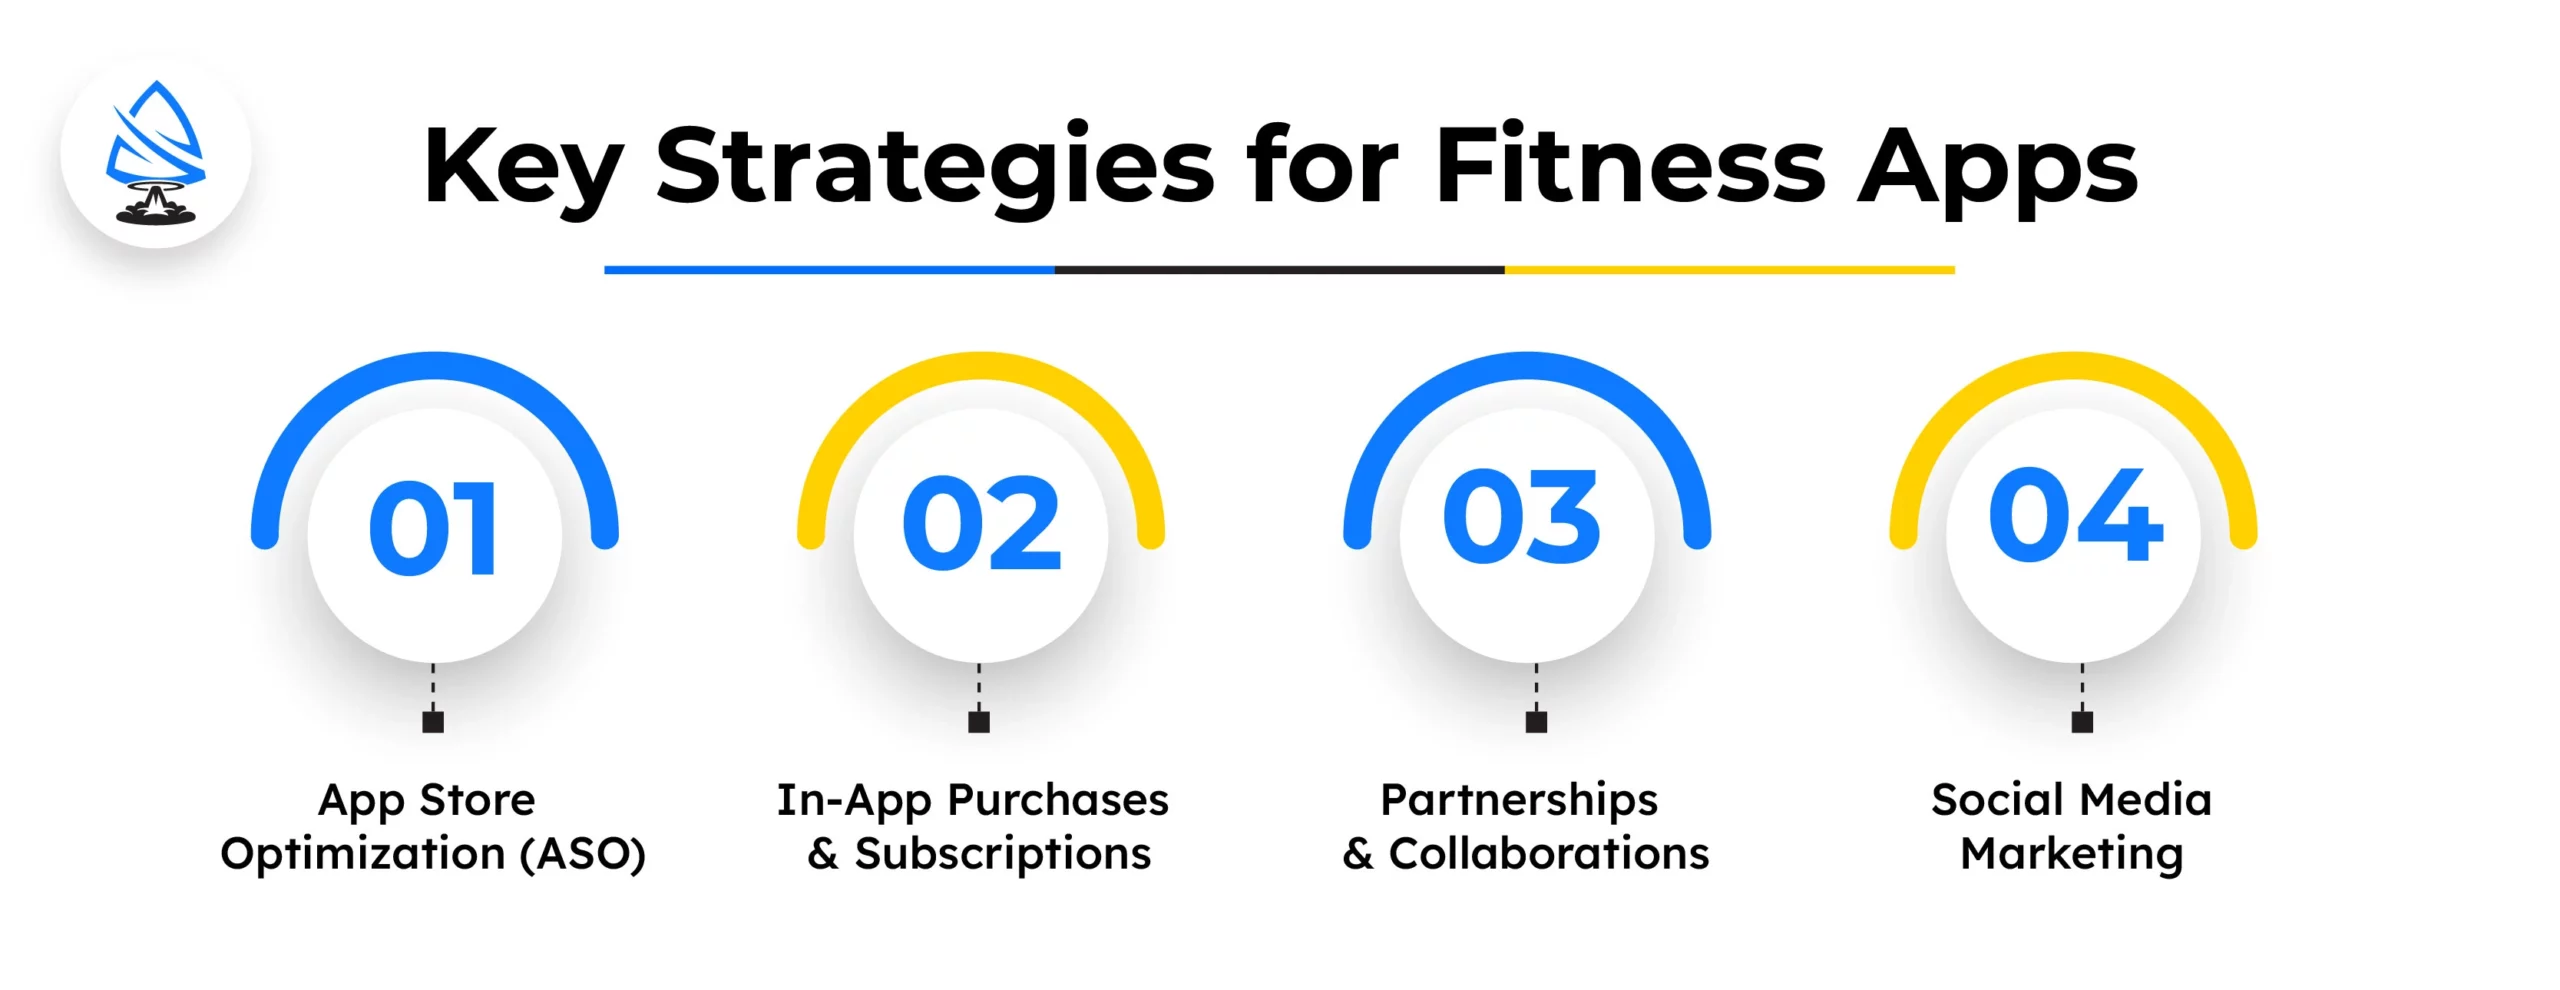 Marketing and Monetization Strategies for Fitness Apps